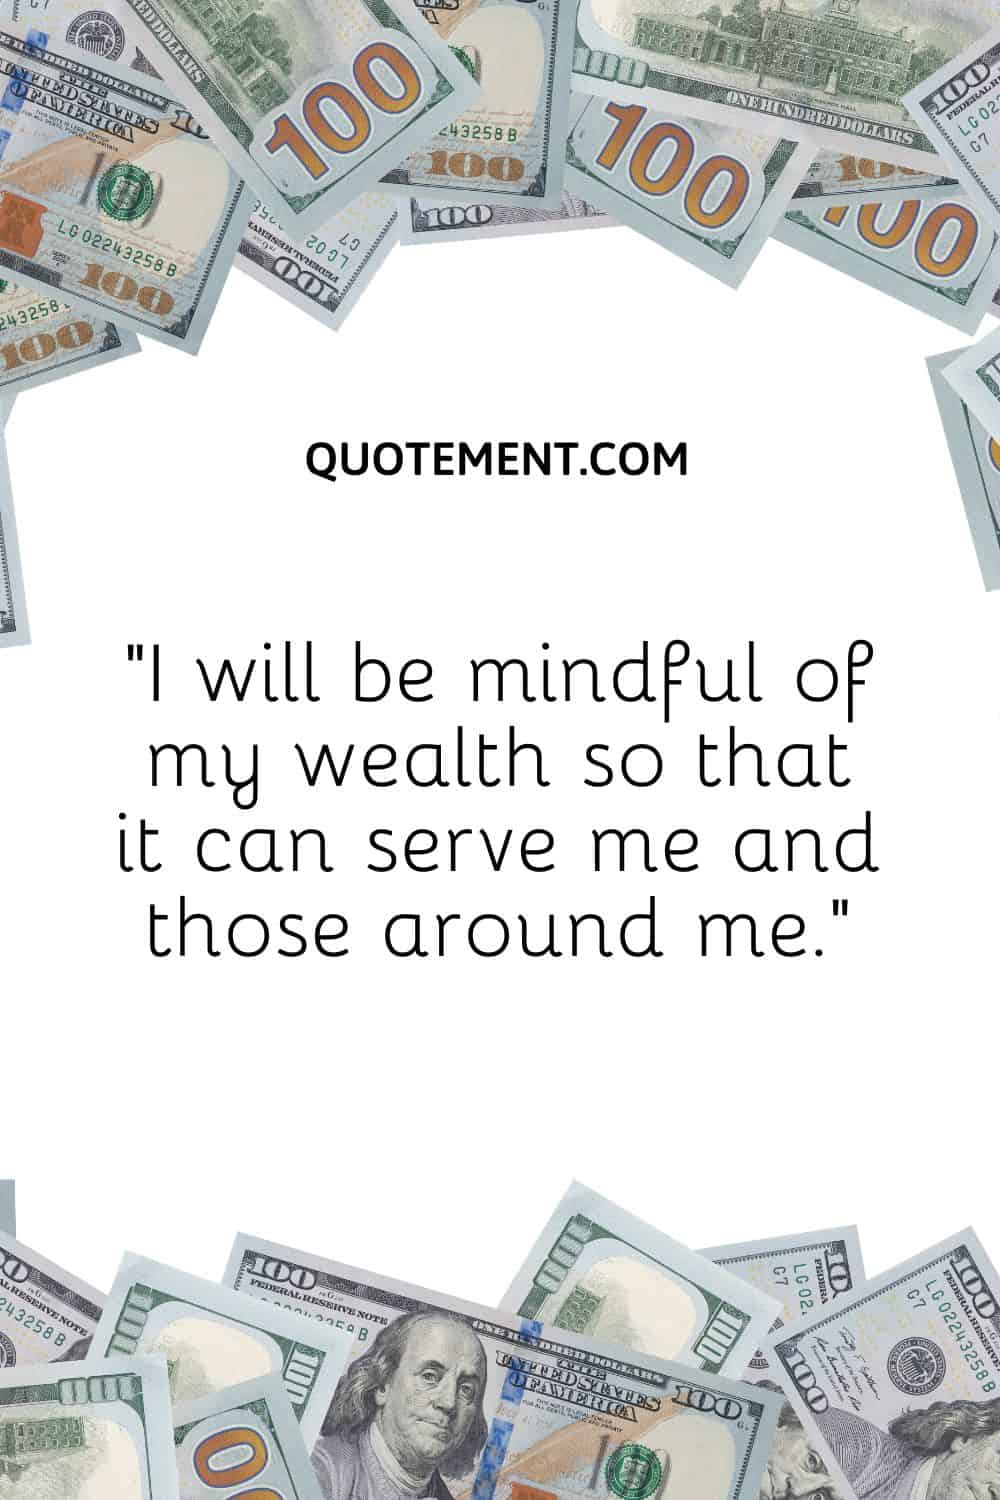 “I will be mindful of my wealth so that it can serve me and those around me.”